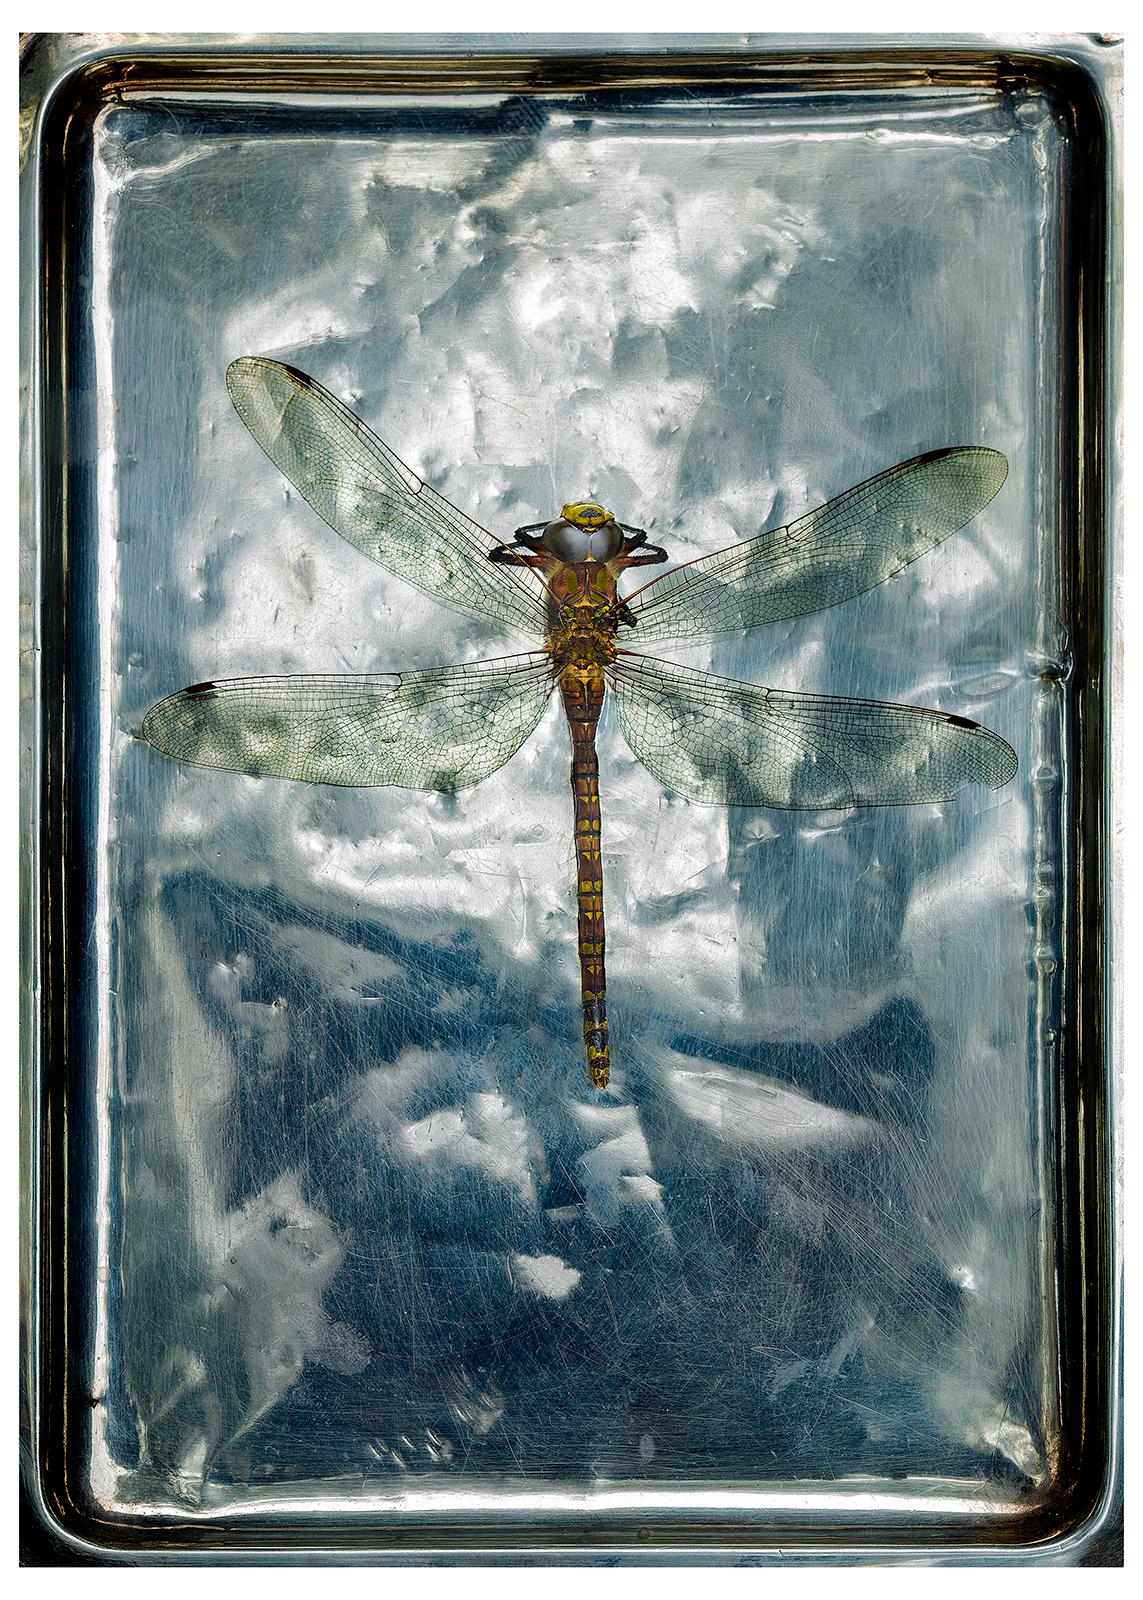 Dragonfly - Signed limited edition nature print, still life colour photo, insect - Contemporary Photograph by Ian Sanderson